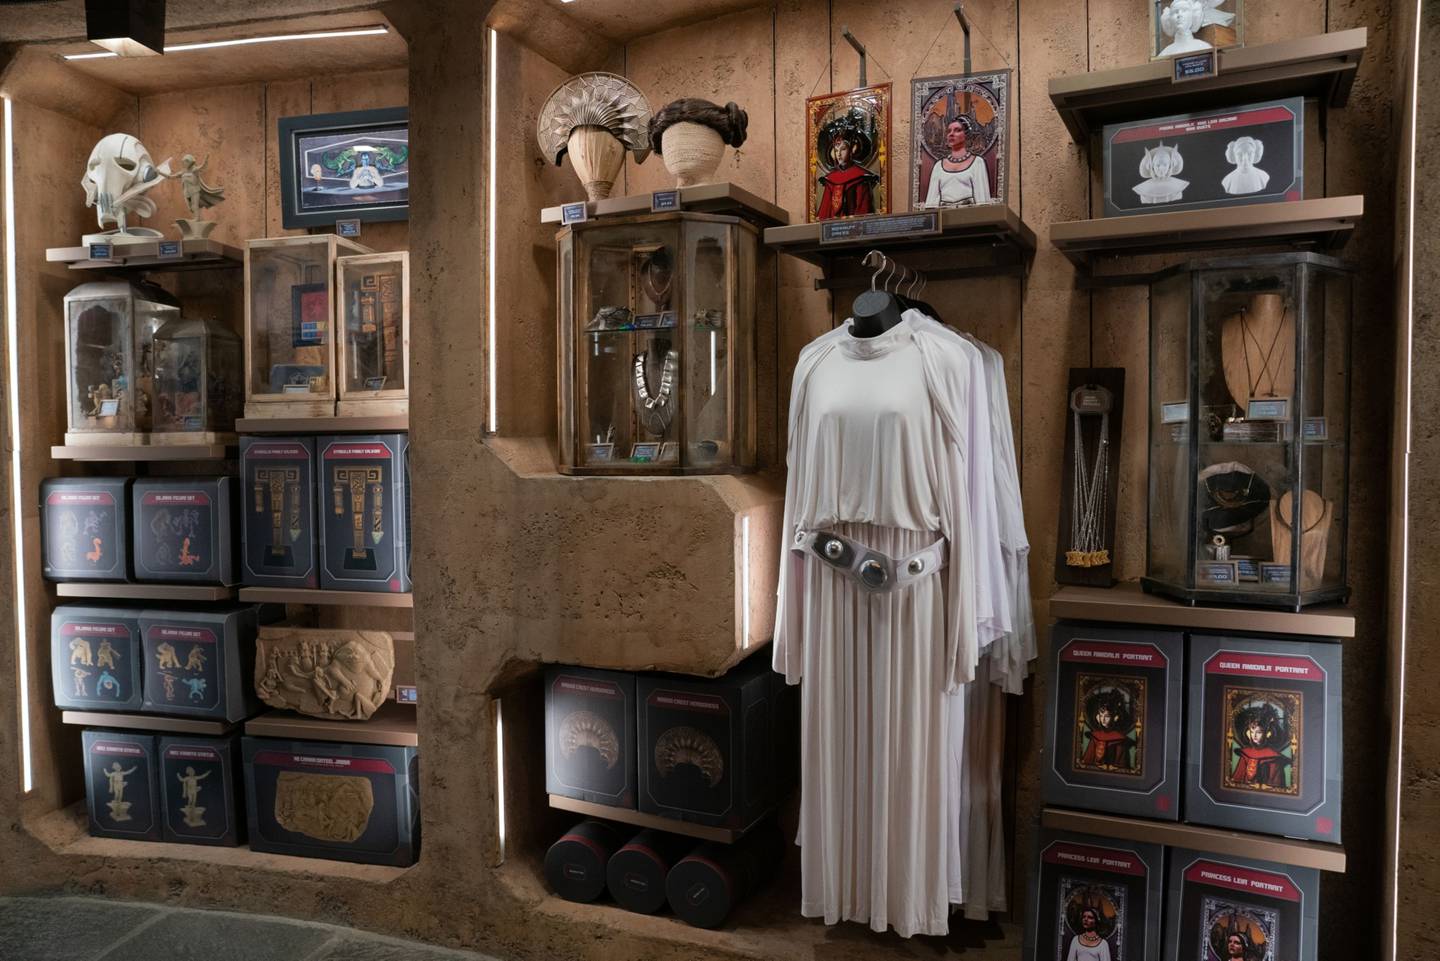 Star Wars merchandise for sale inside a gift shop in the Star Wars: Galaxy's Edge themed area during the reopening of the Disneyland theme park in Anaheim, California, U.S., on Friday, April 30, 2021. Walt Disney Co.s original Disneyland resort in California is sold out for weekends through May, an indication of pent-up demand for leisure activities as the pandemic eases in the nations most-populous state. Photographer: Bing Guan/Bloomberg